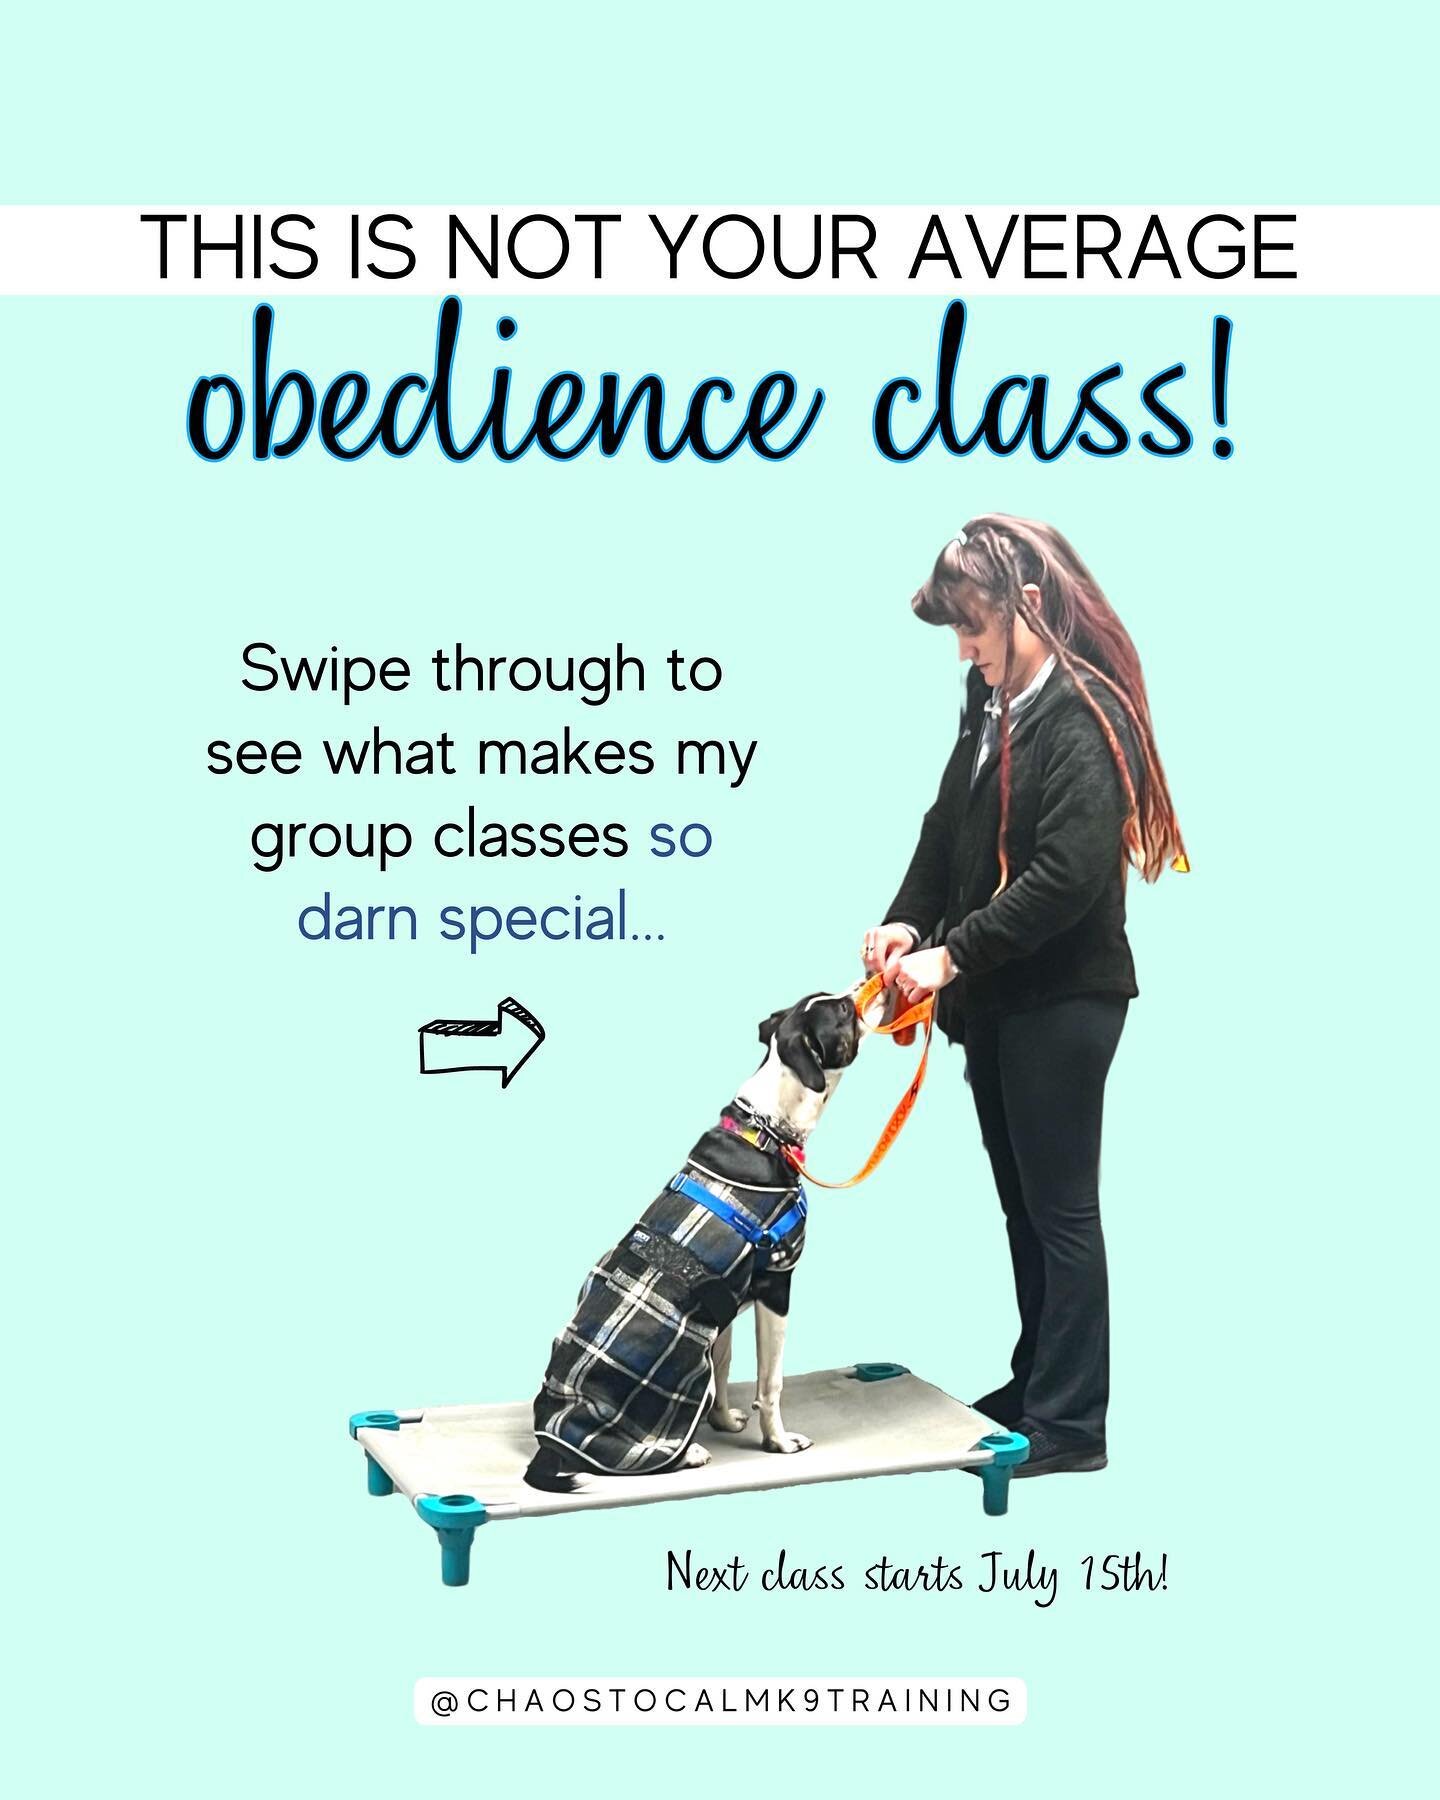 Don&rsquo;t sign up for a group class until you read this! 👇

If you&rsquo;re signing up for a group obedience class with your dog, make sure it has the following components:

👉PRACTICALITY!
Make sure the instruction is designed to transfer to real